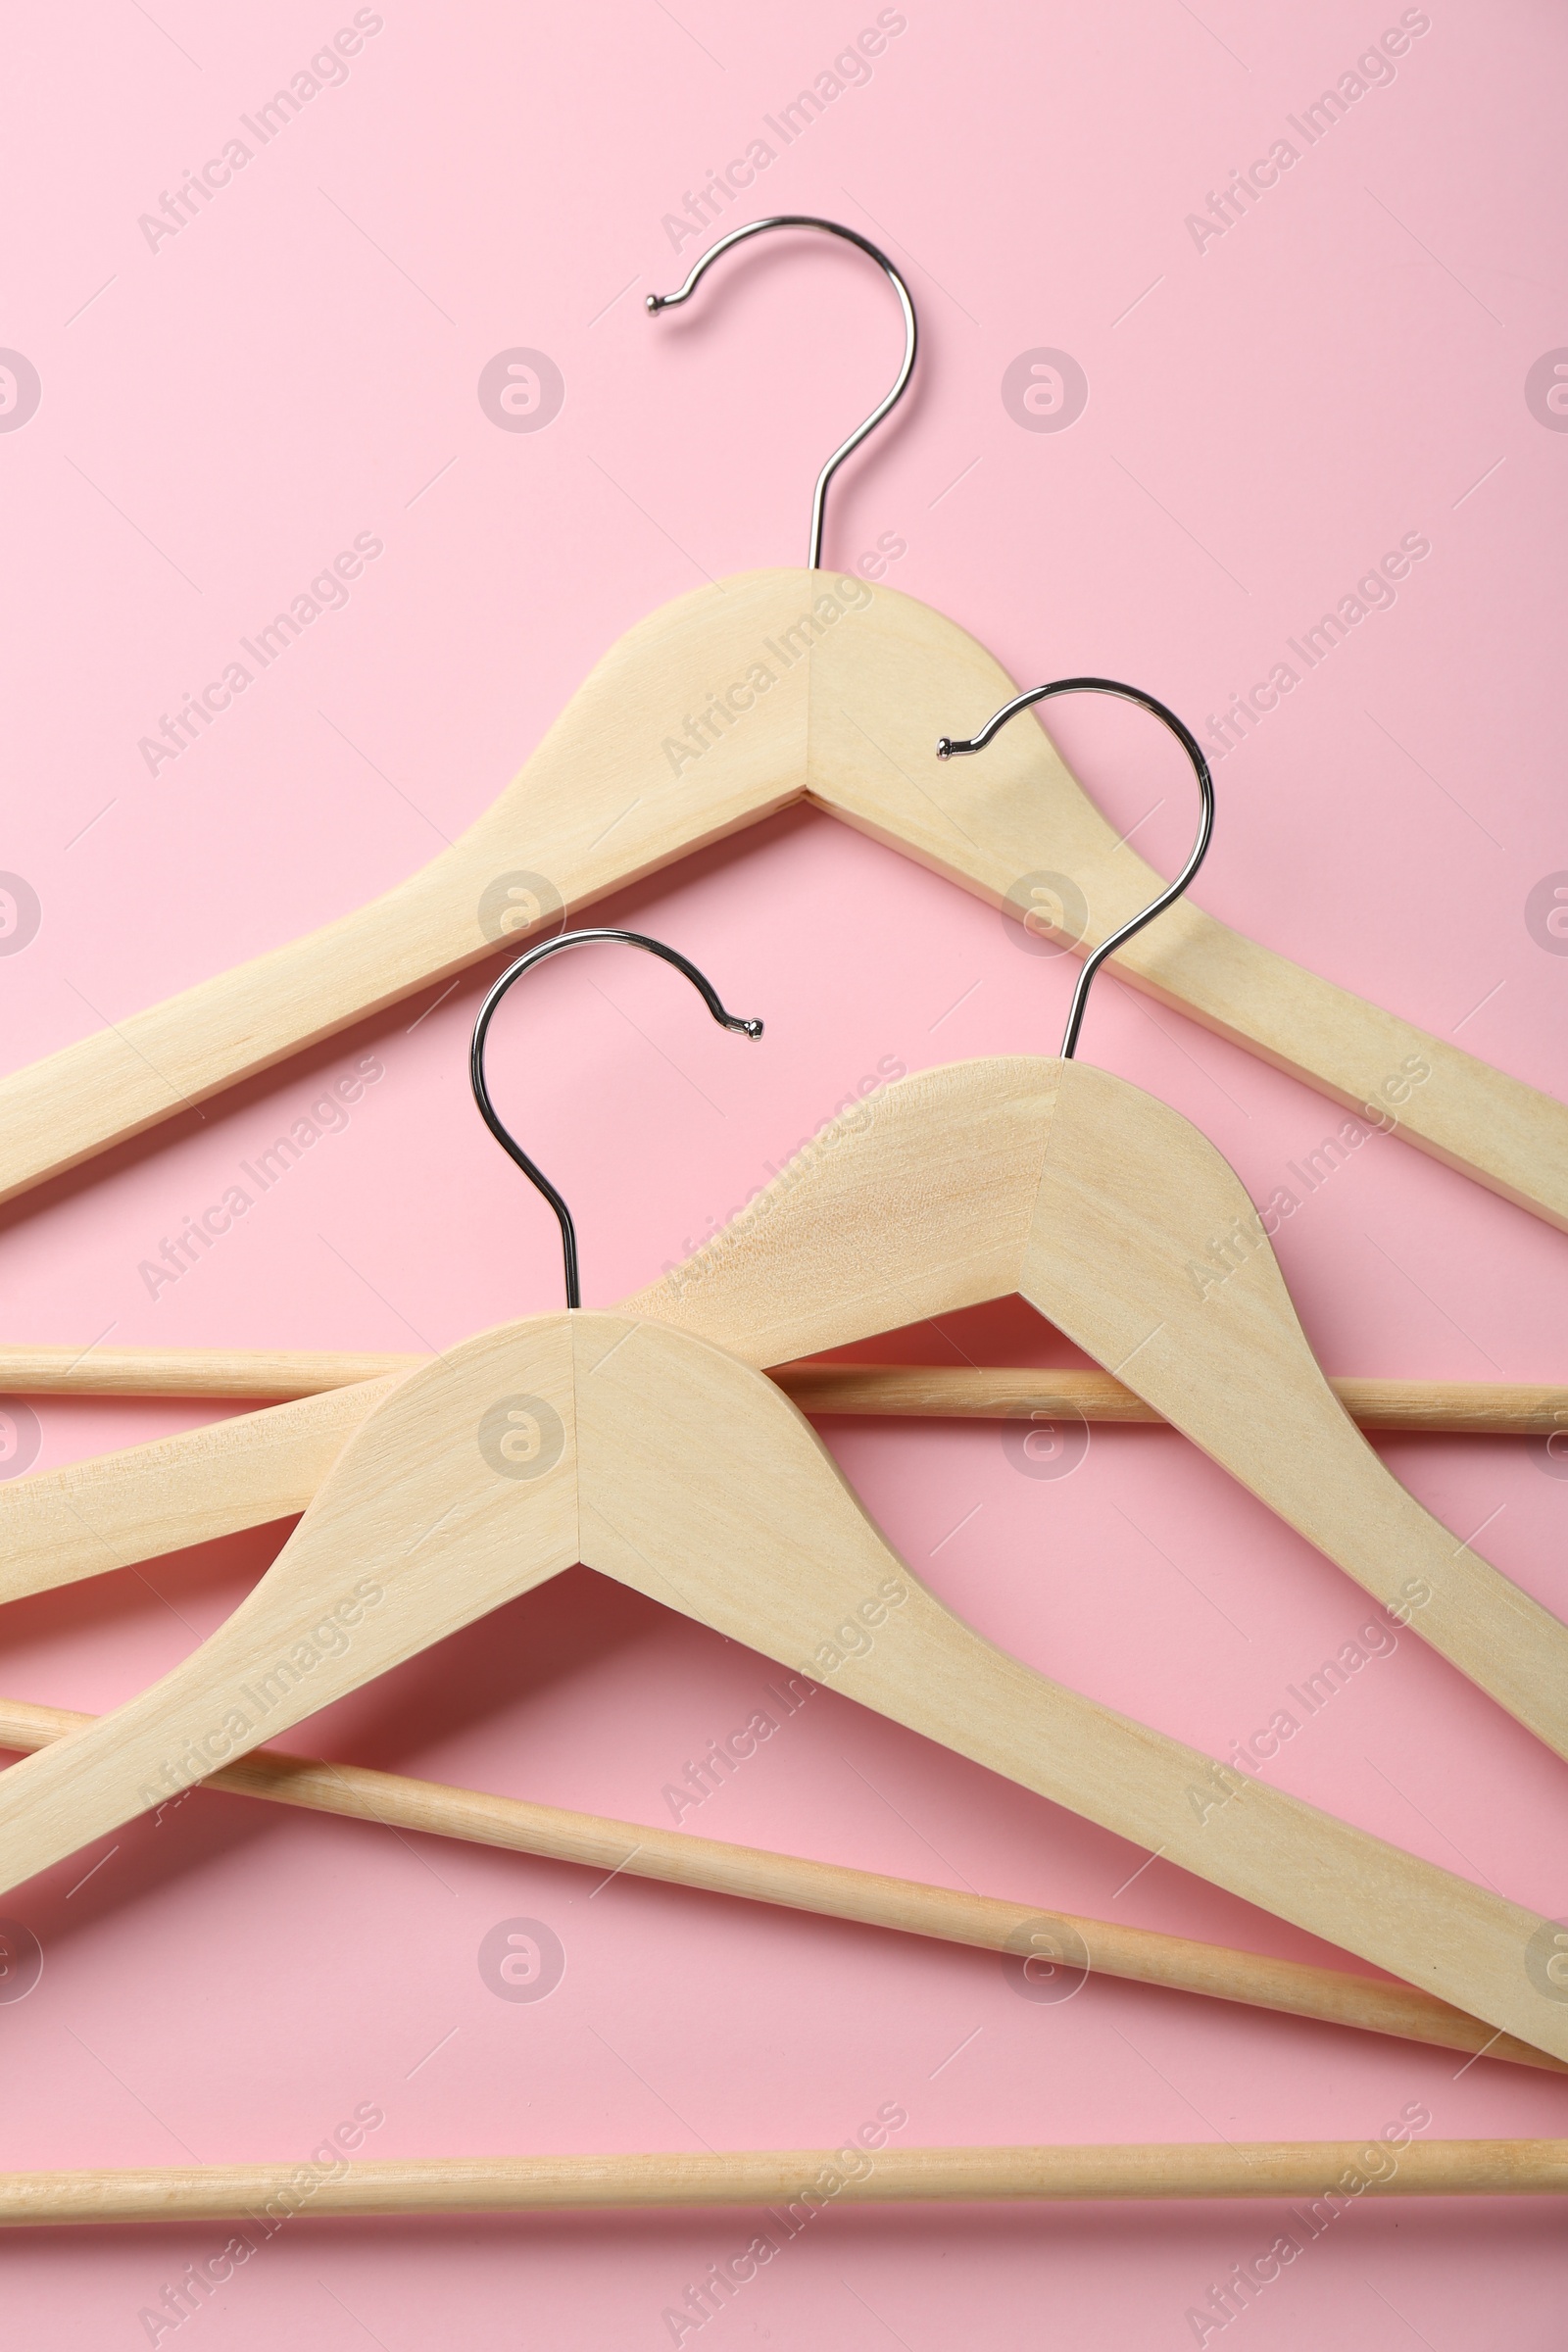 Photo of Wooden hangers on pink background, top view